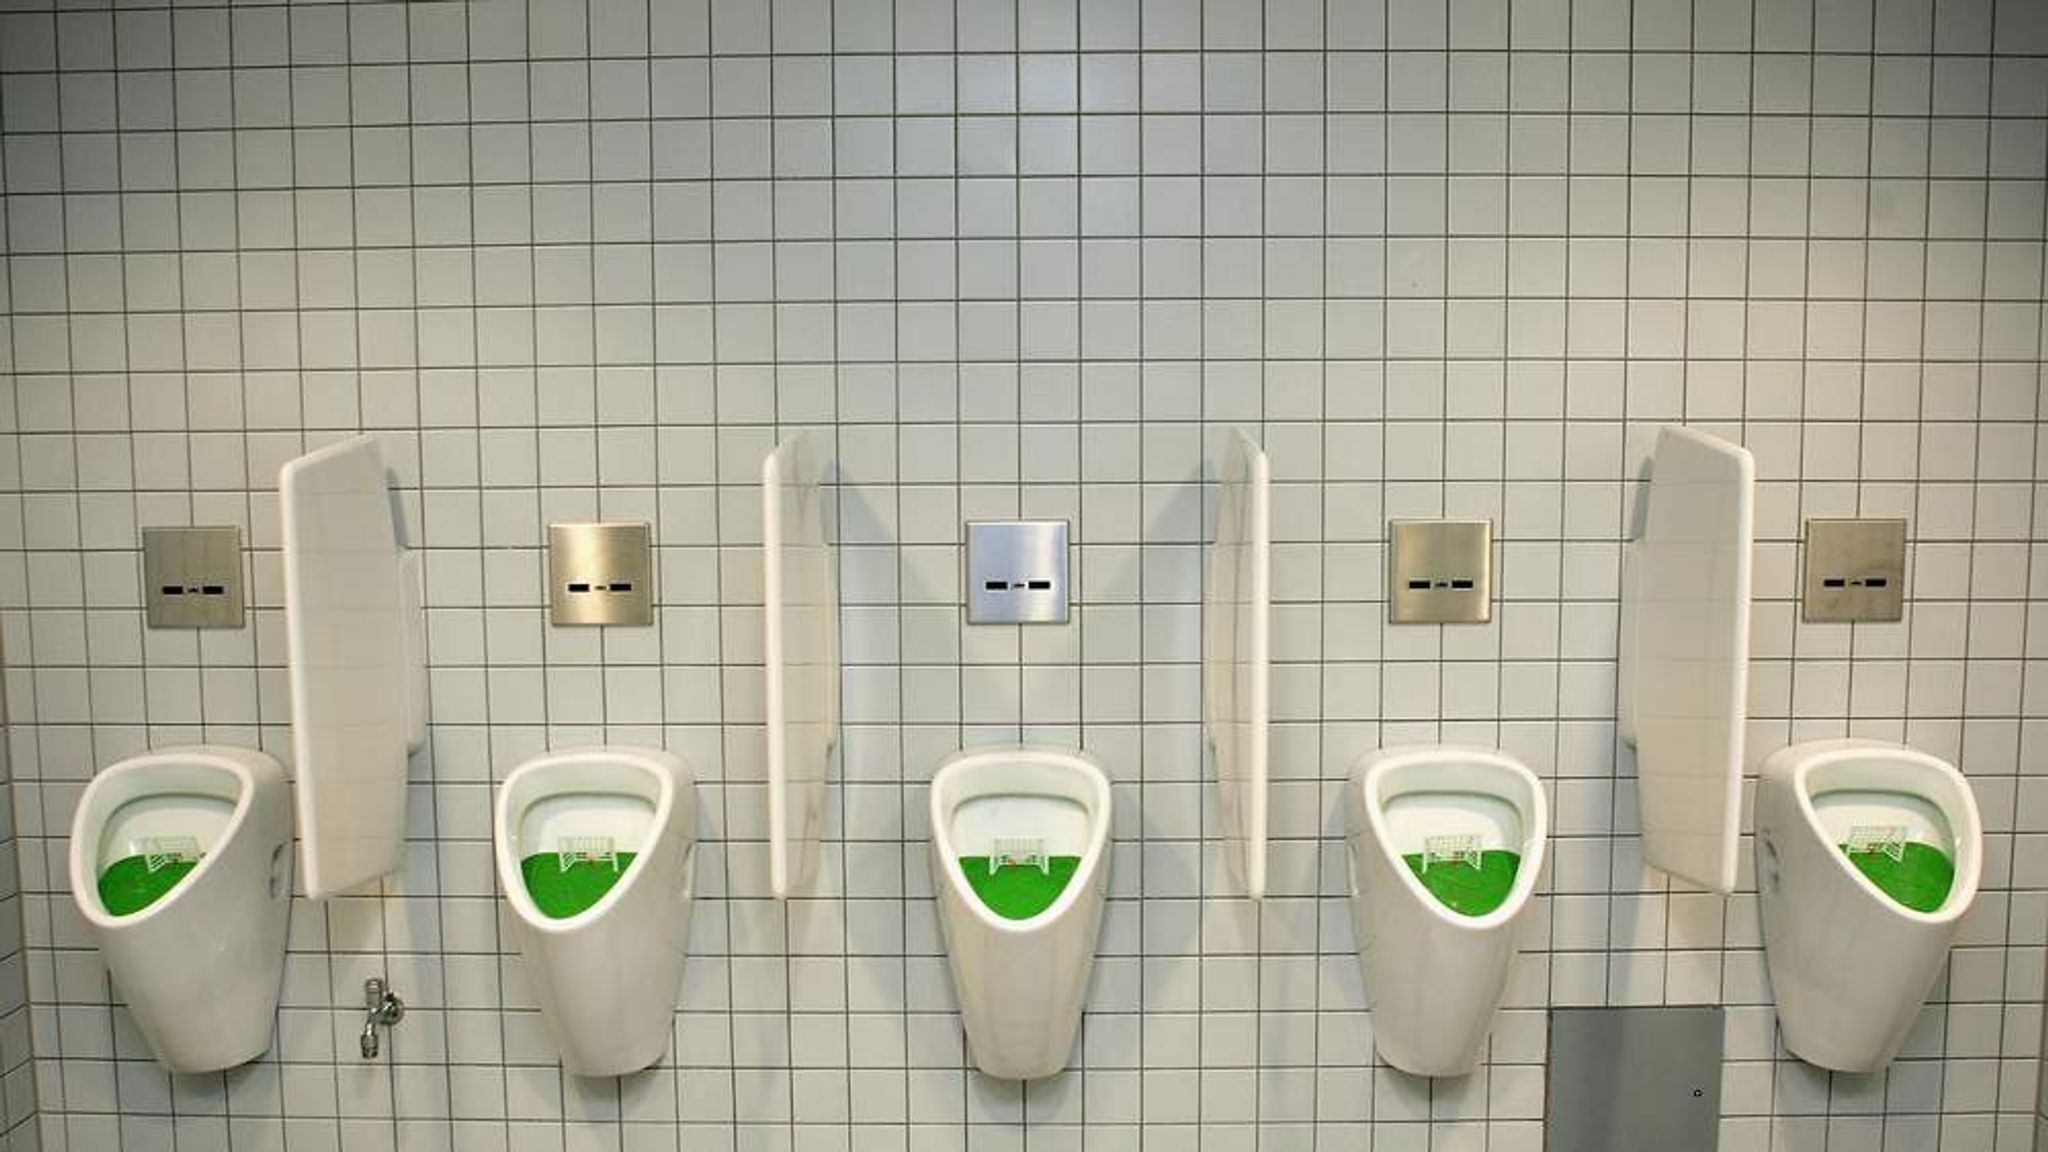 Physicists have designed a new type of urinal insert. 